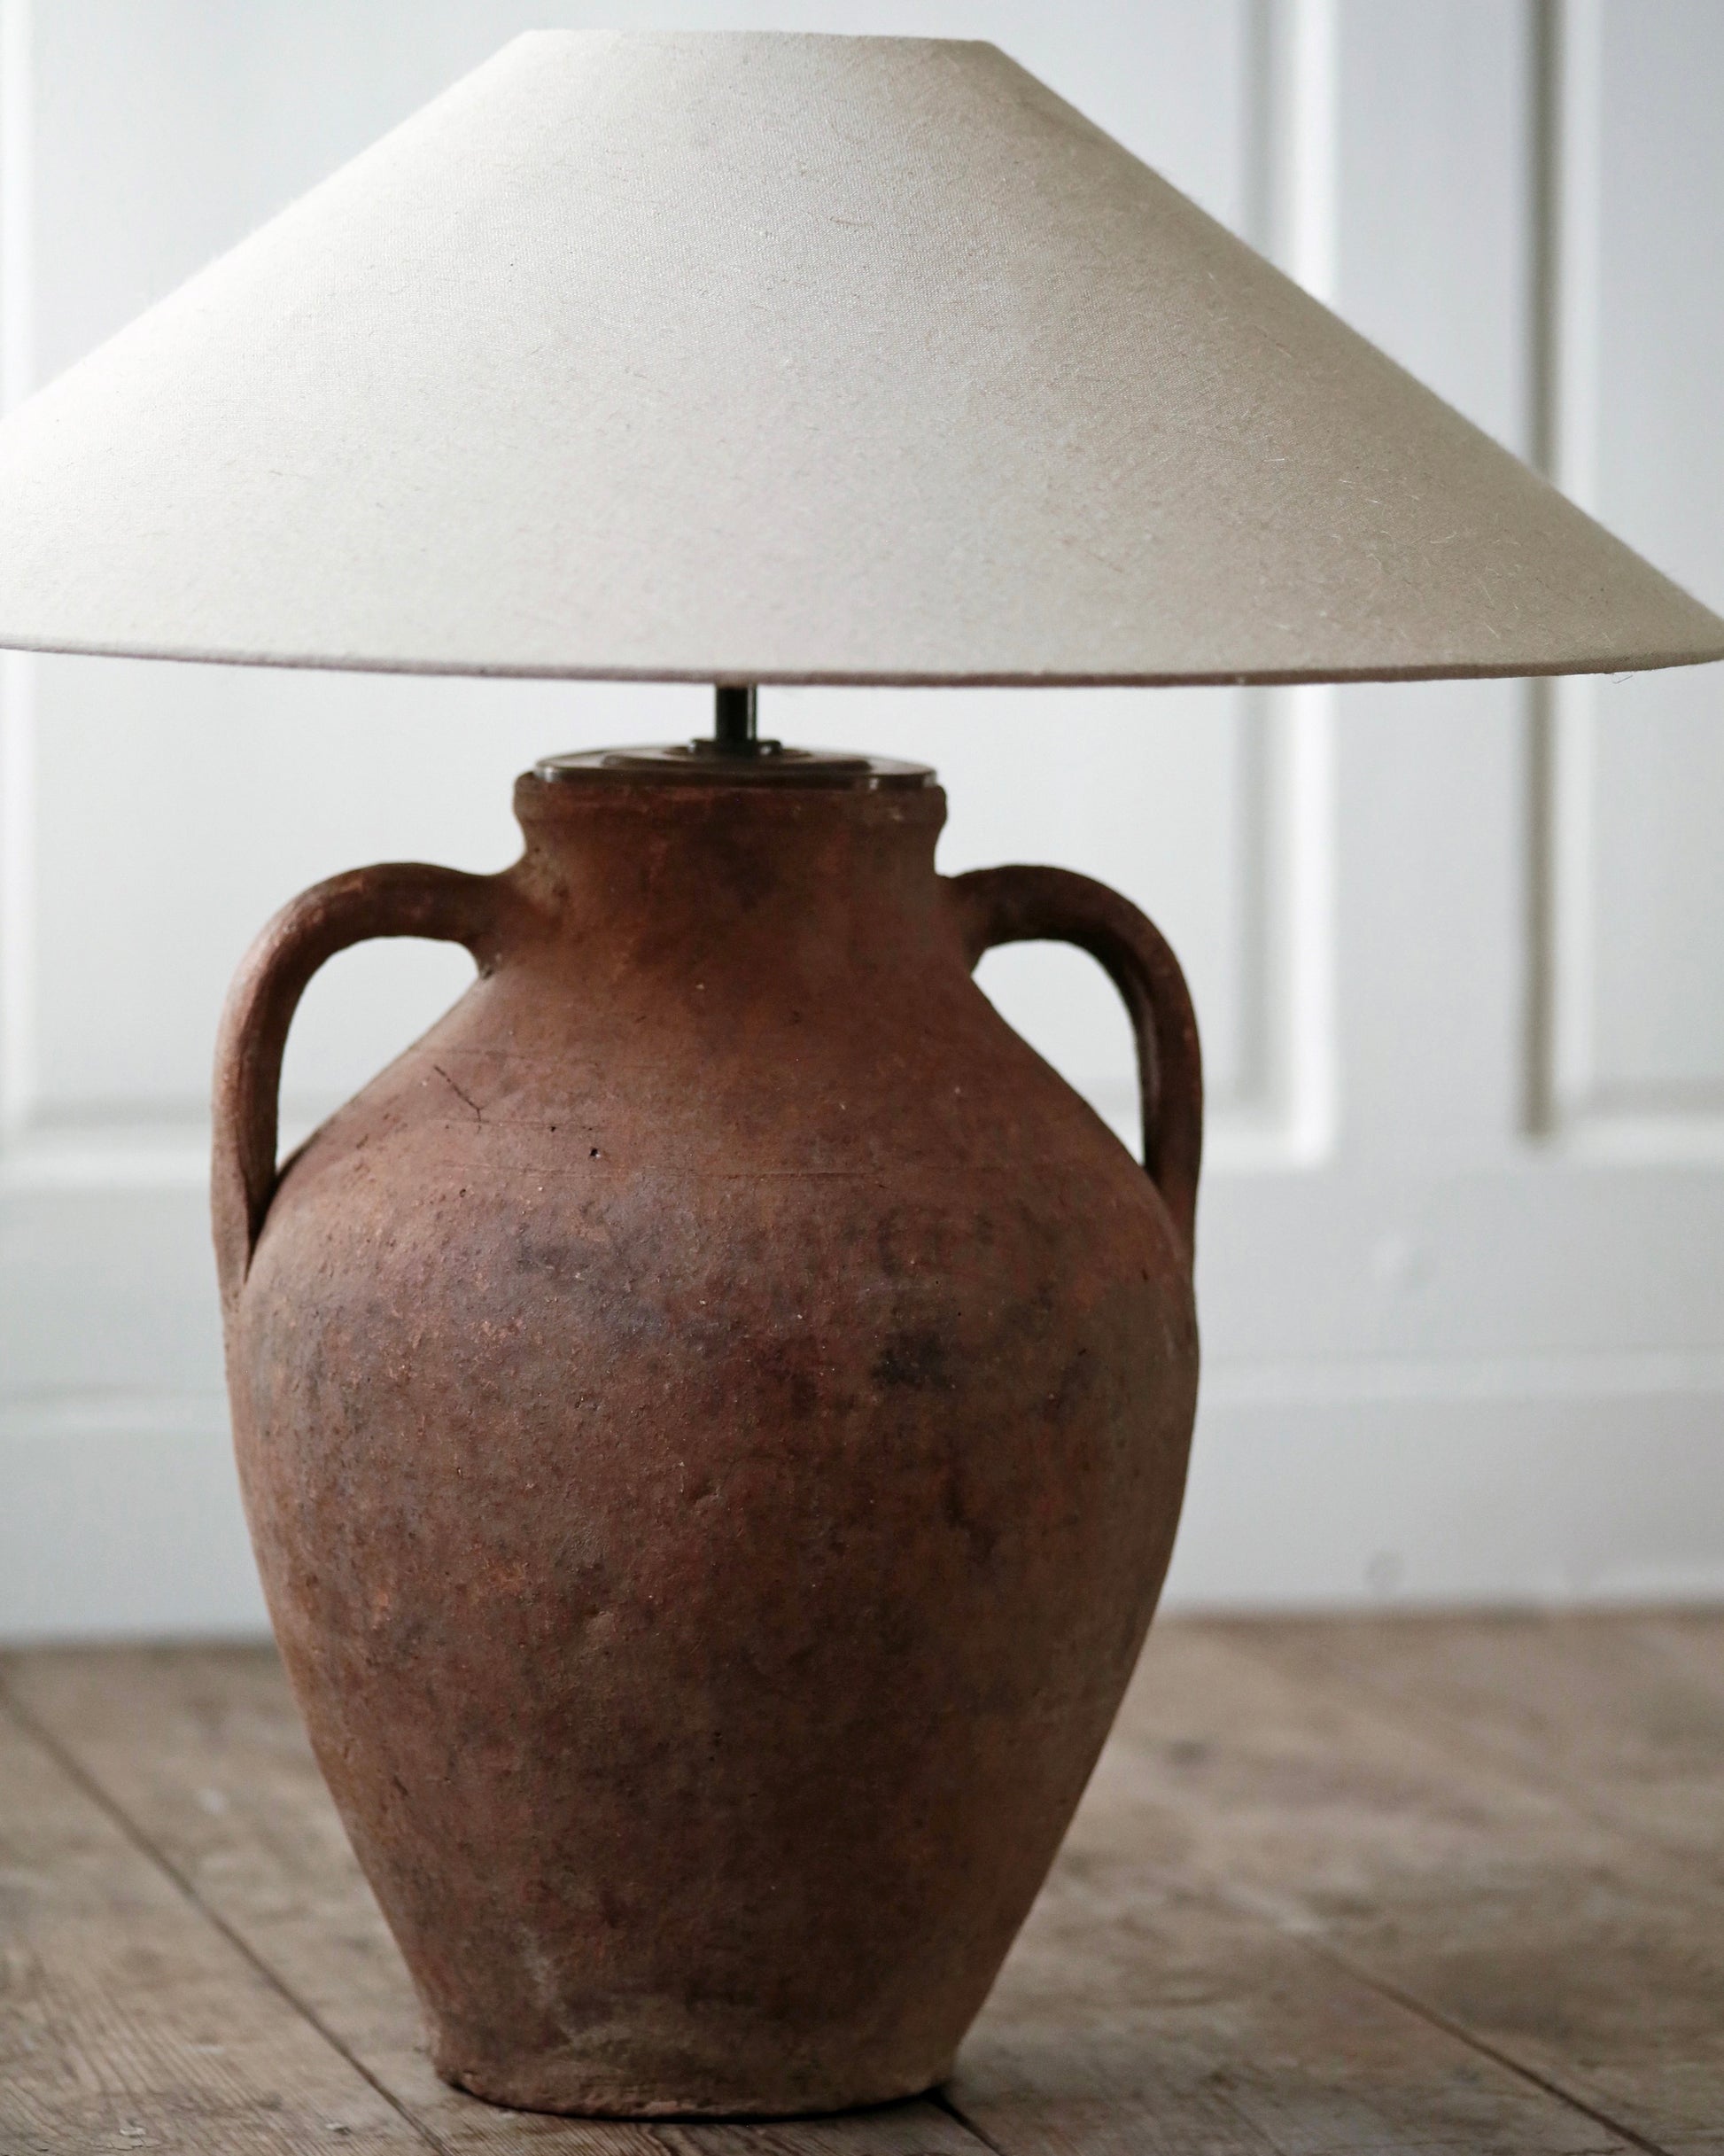 Rustic brown terracotta pot with handles converted to lamp